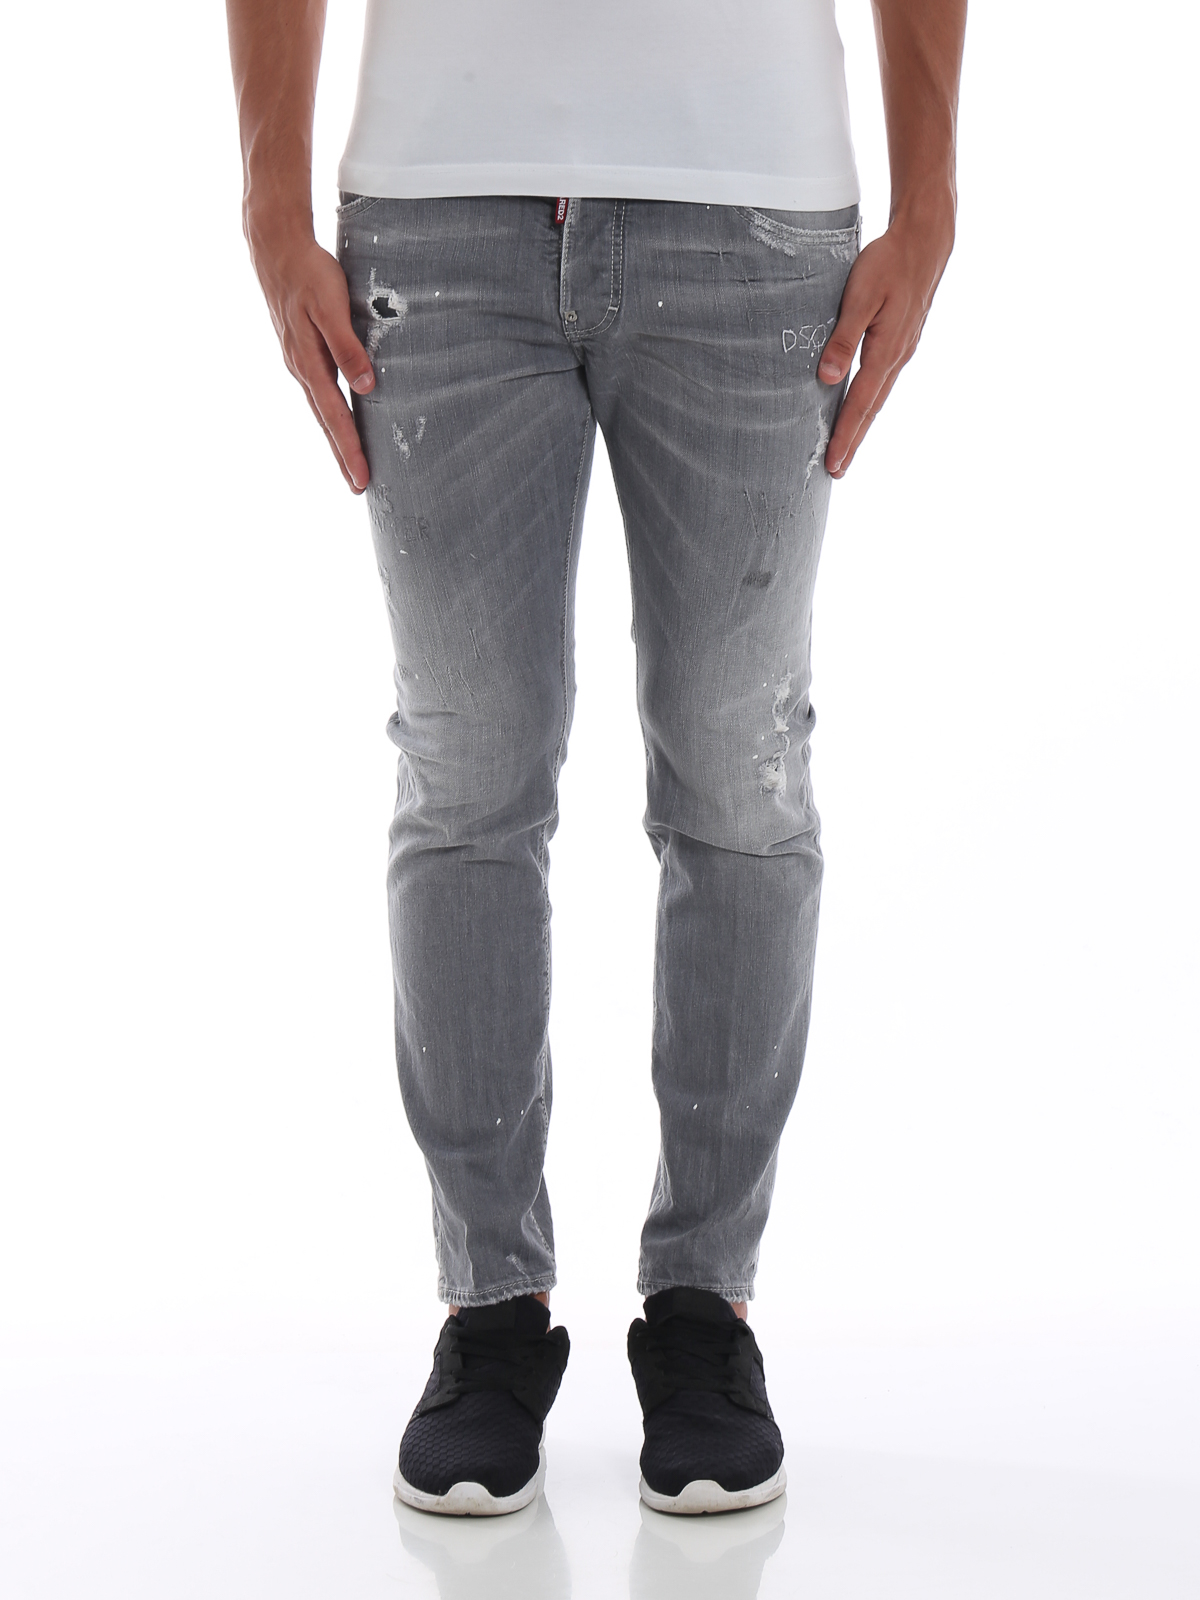 dsquared2 grey jeans